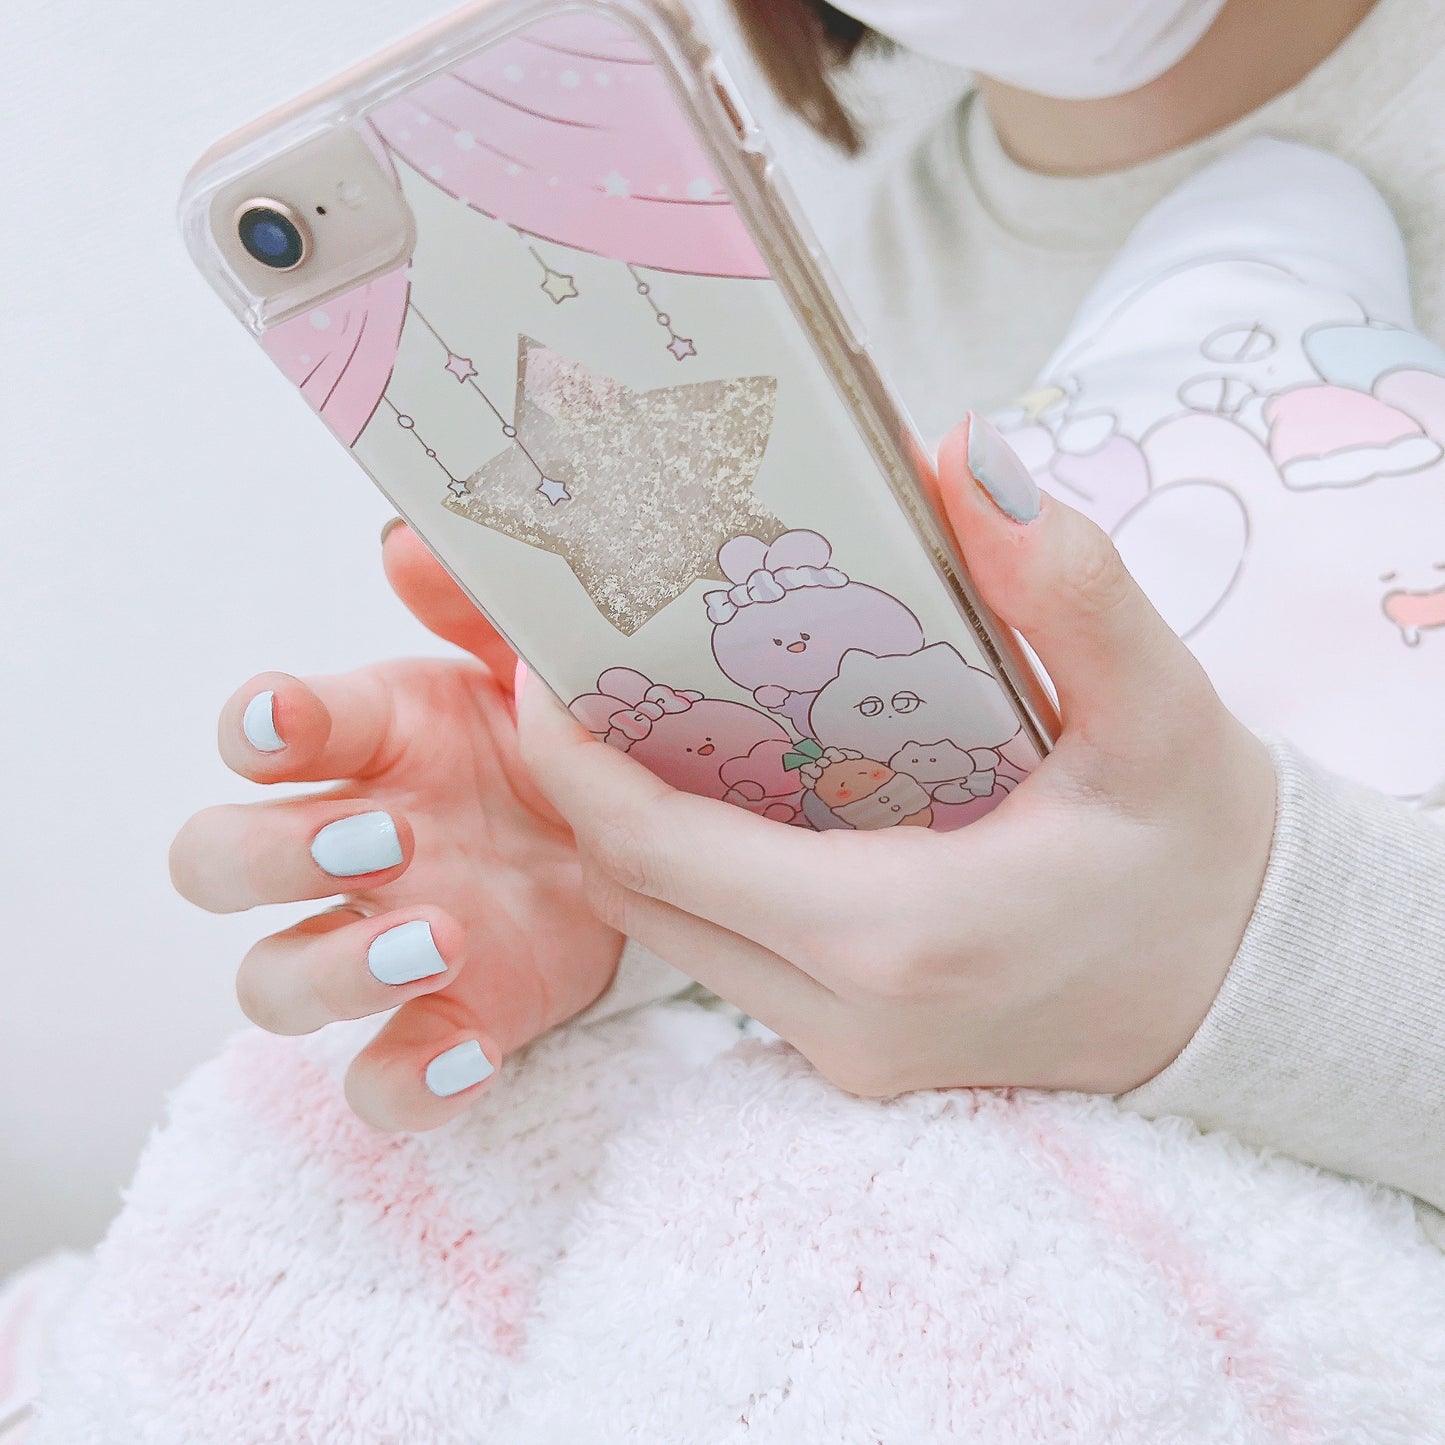 [Asamimi-chan] Glitter case (pajama party) [shipped in early October]